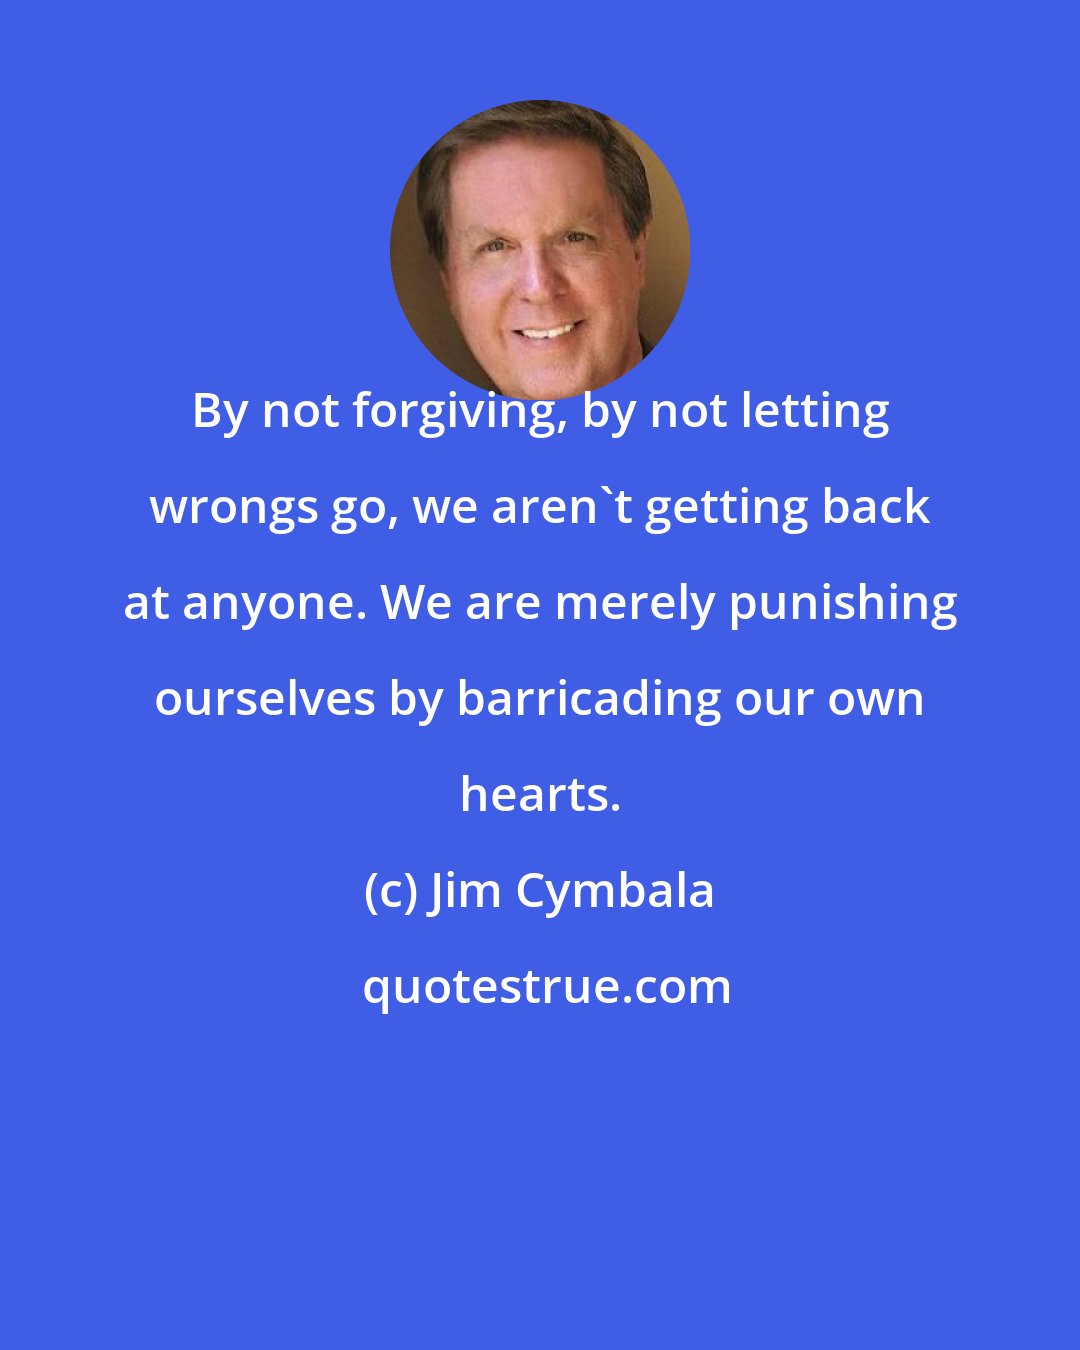 Jim Cymbala: By not forgiving, by not letting wrongs go, we aren't getting back at anyone. We are merely punishing ourselves by barricading our own hearts.